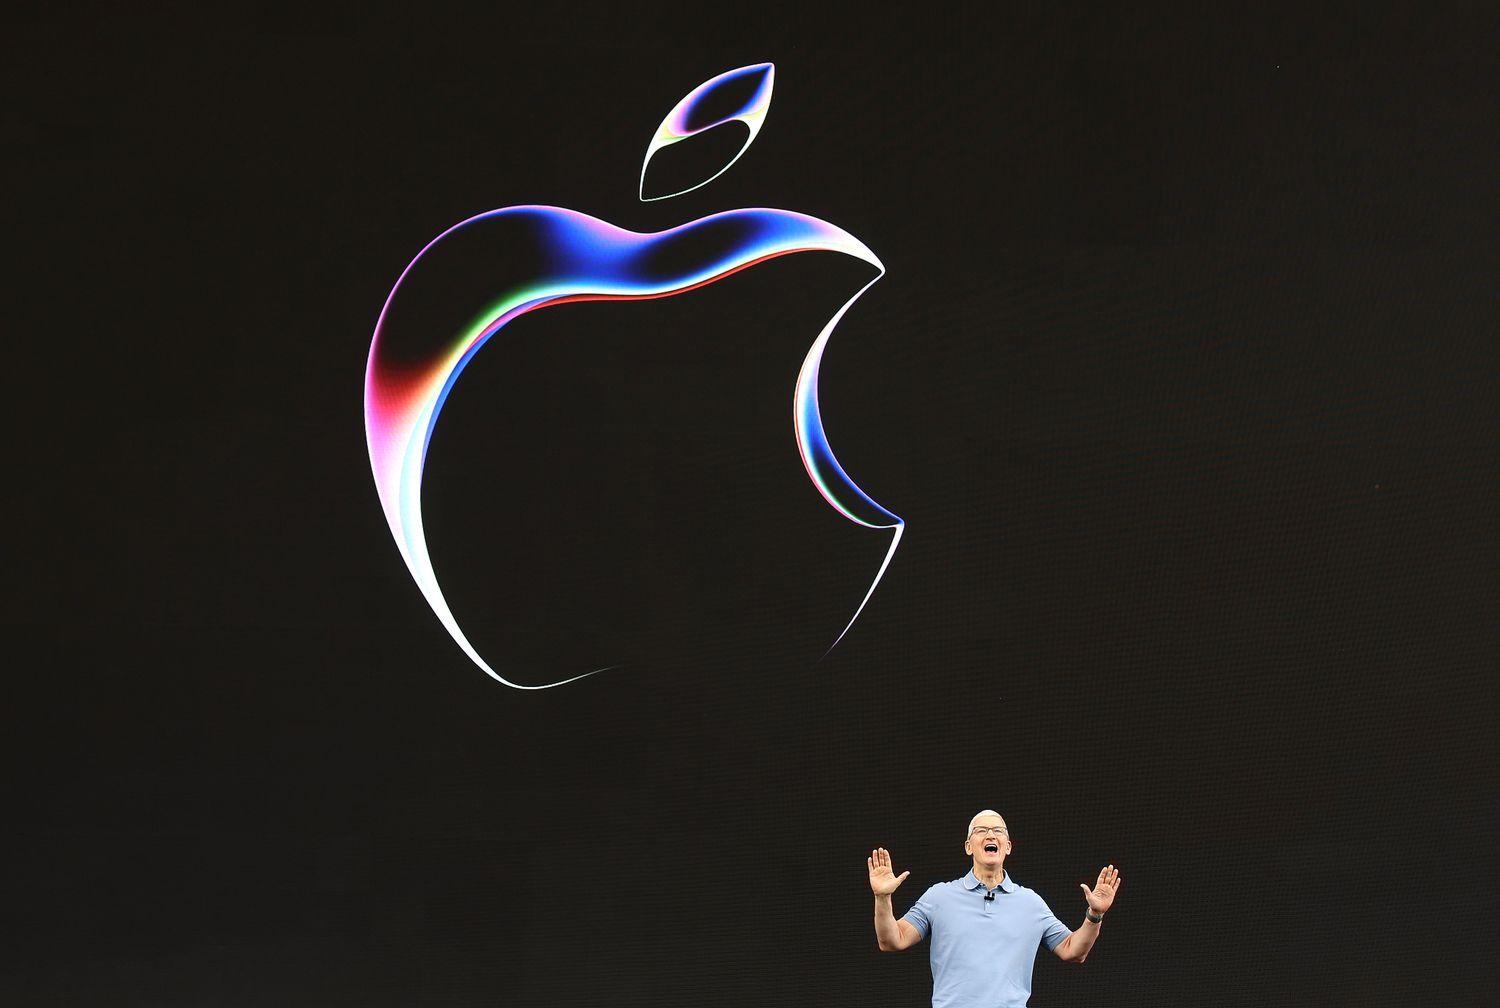 Apple Announces September Event With iPhone Release Expected